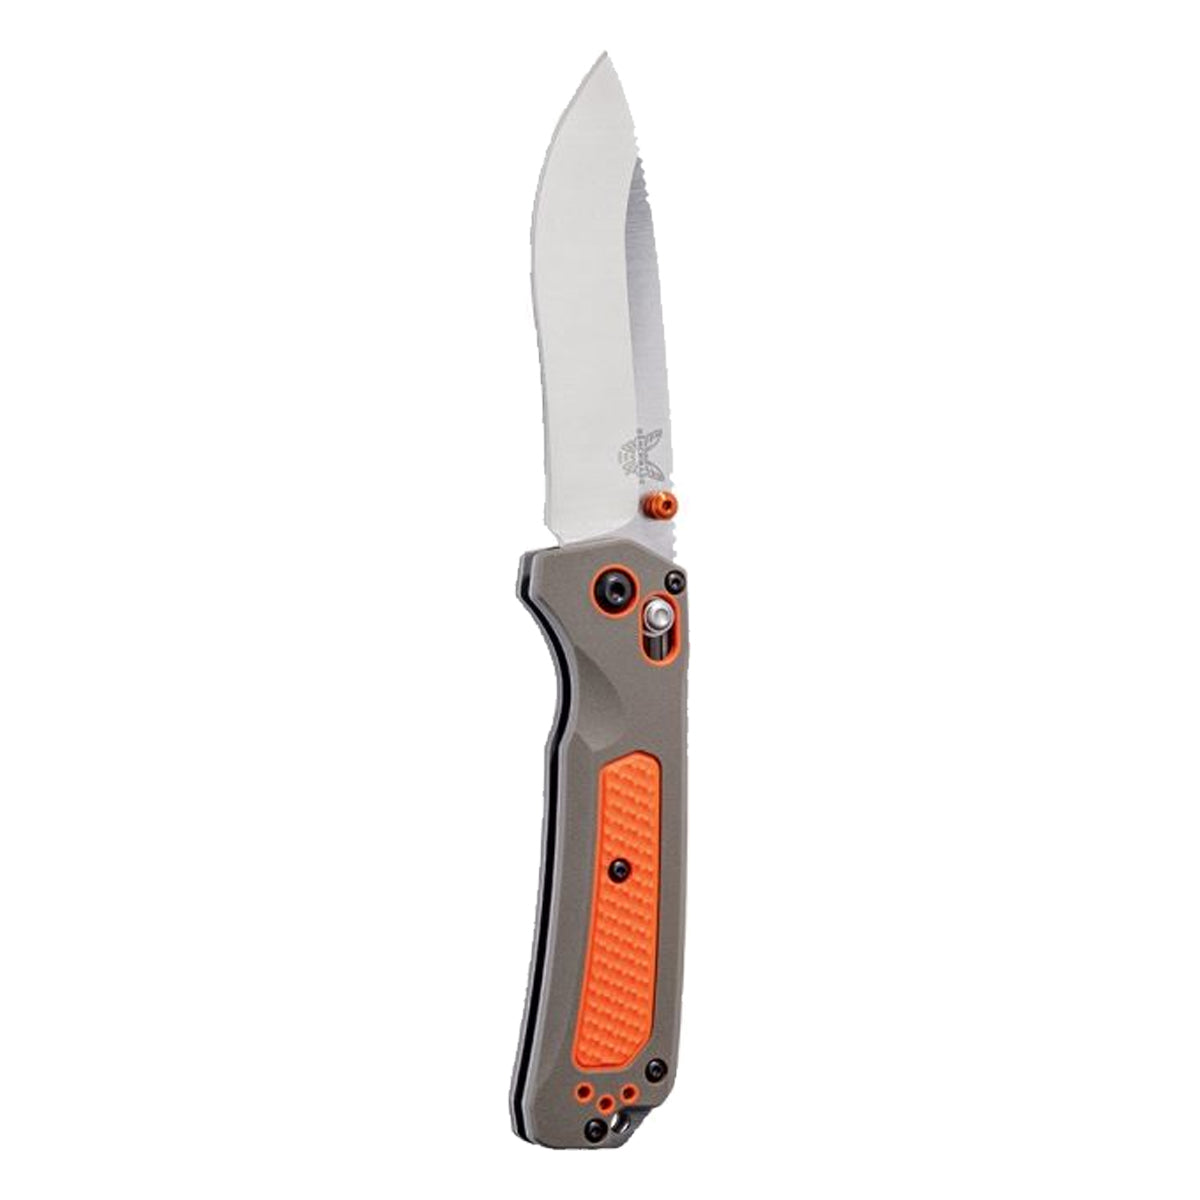 Benchmade 15061 Grizzly Ridge in  by GOHUNT | Benchmade - GOHUNT Shop